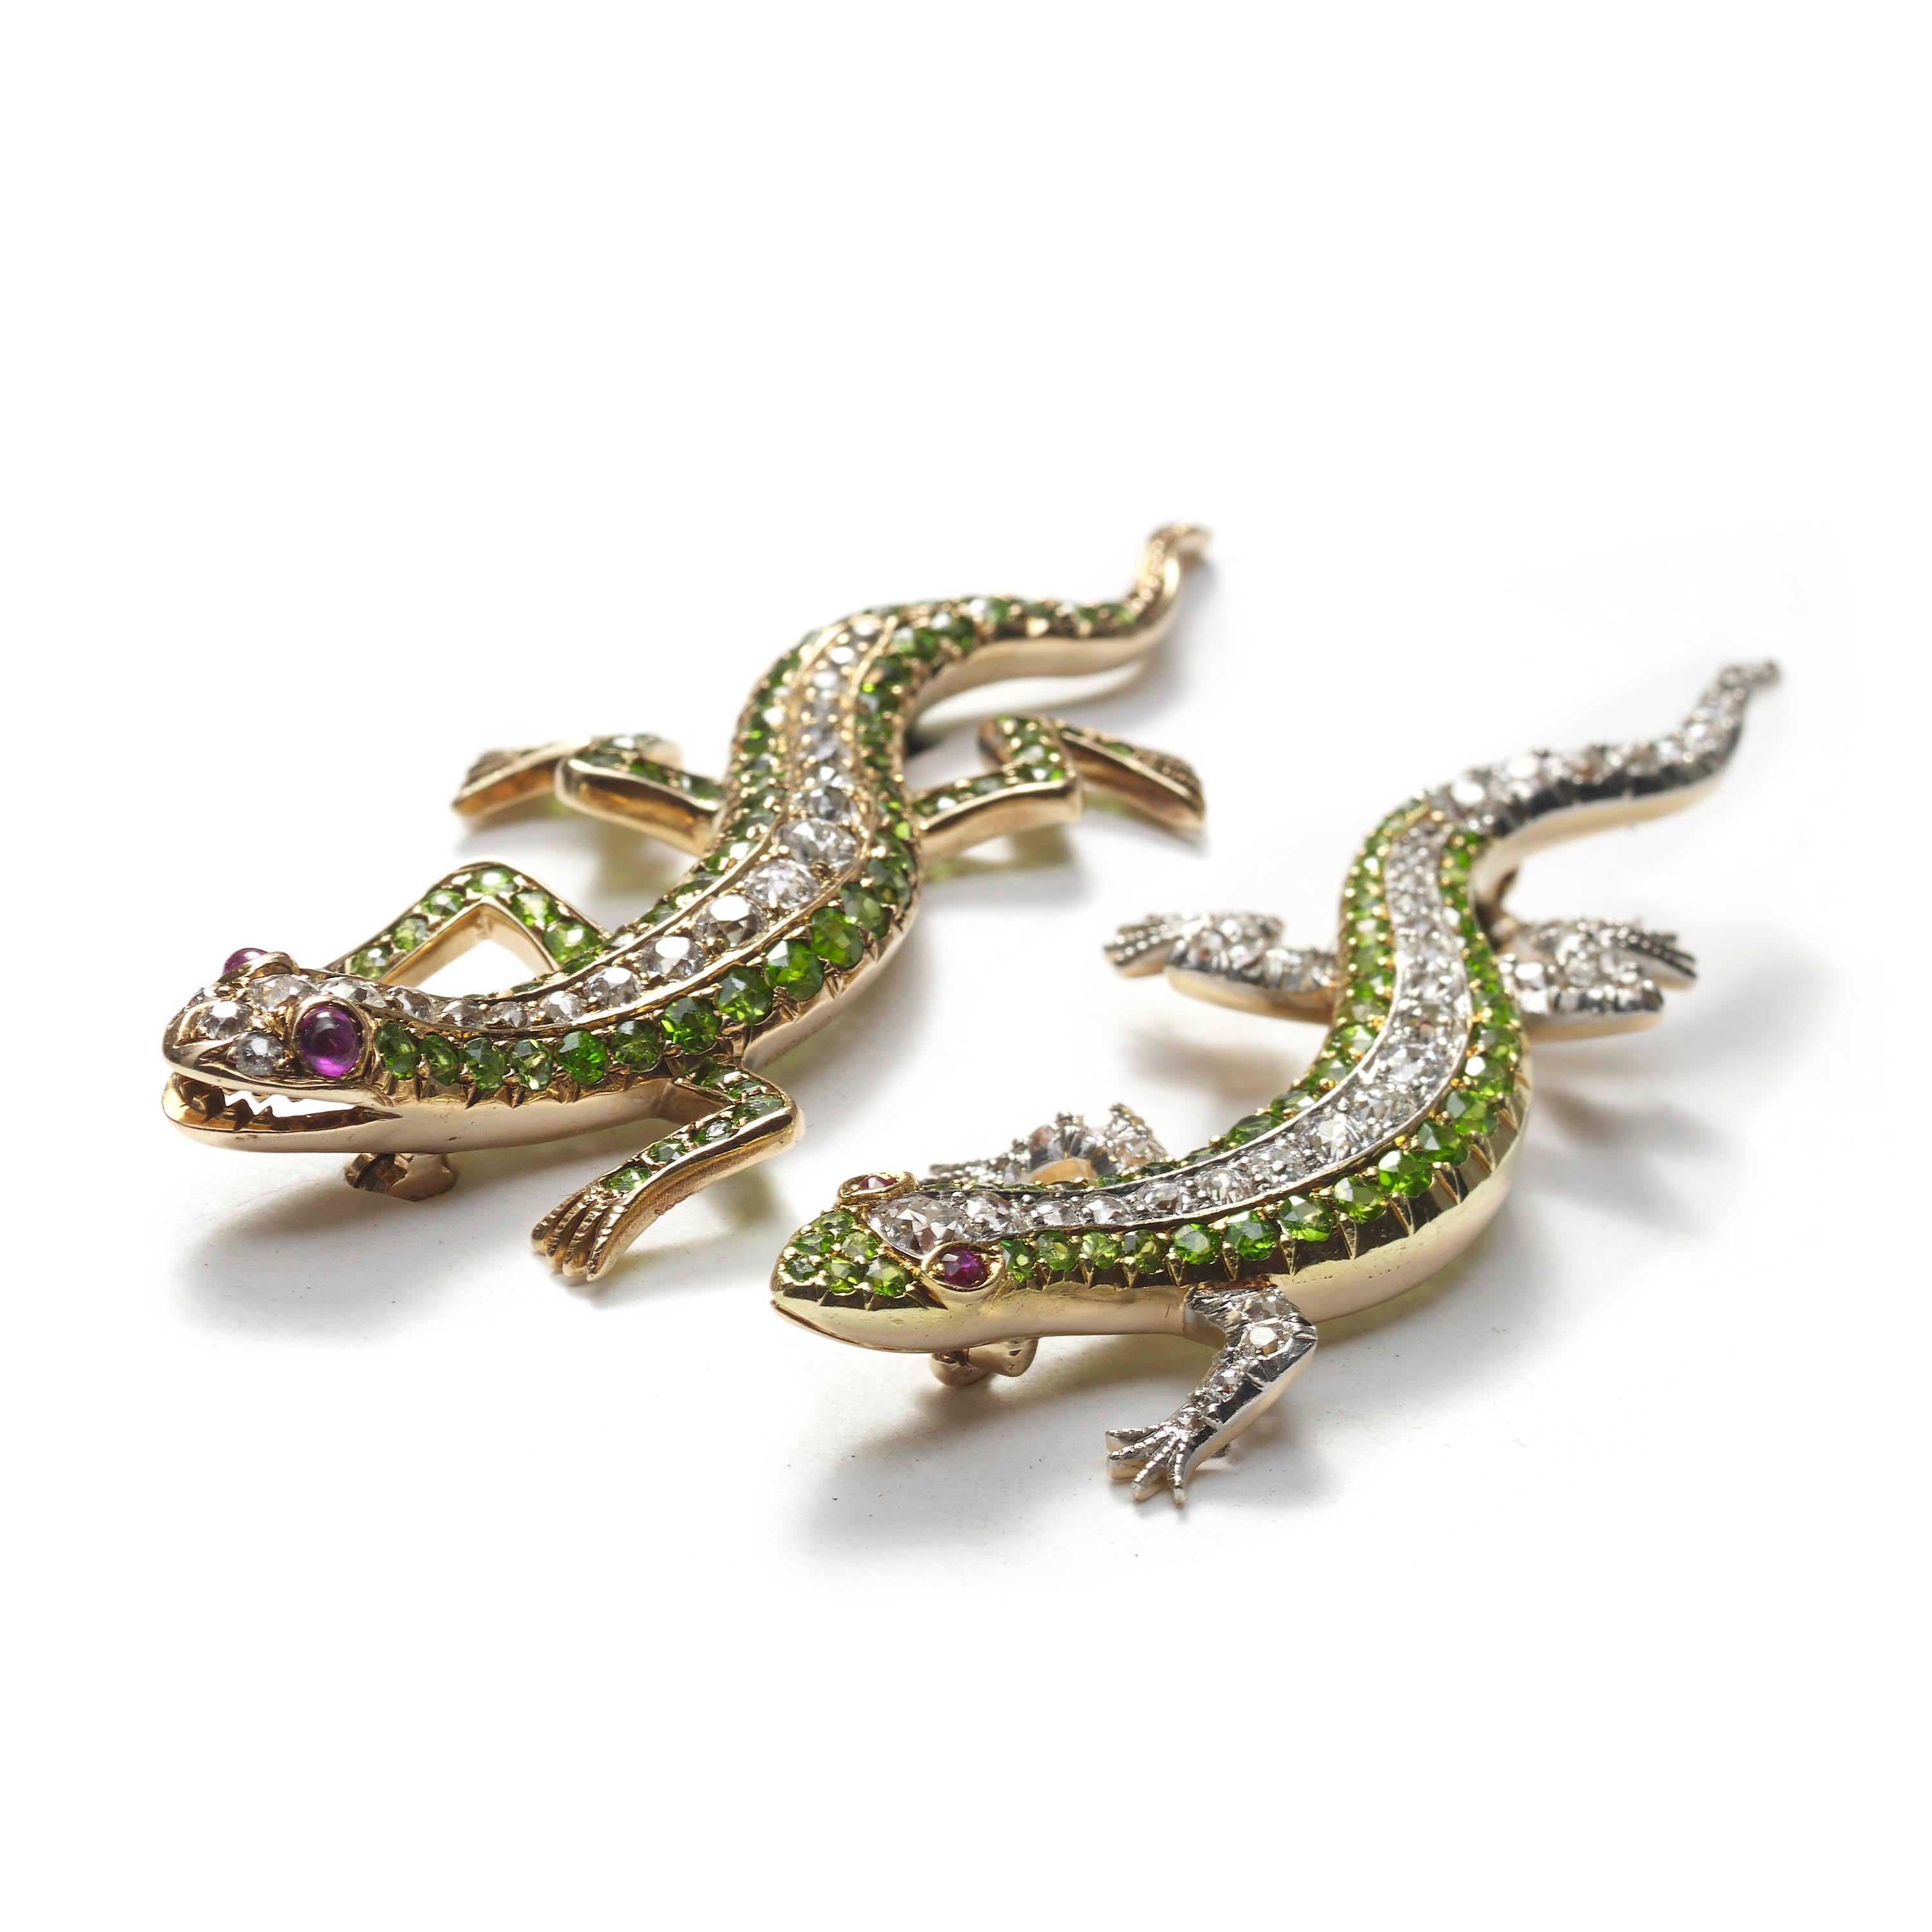 A pair of antique salamander brooches, each pavé set with demantoid garnets  in the legs, tail and sides, old-cut diamonds from the nose to the base of the tail, and round cabochon ruby eyes, mounted in 14ct yellow gold. Circa 1925.
Approximately